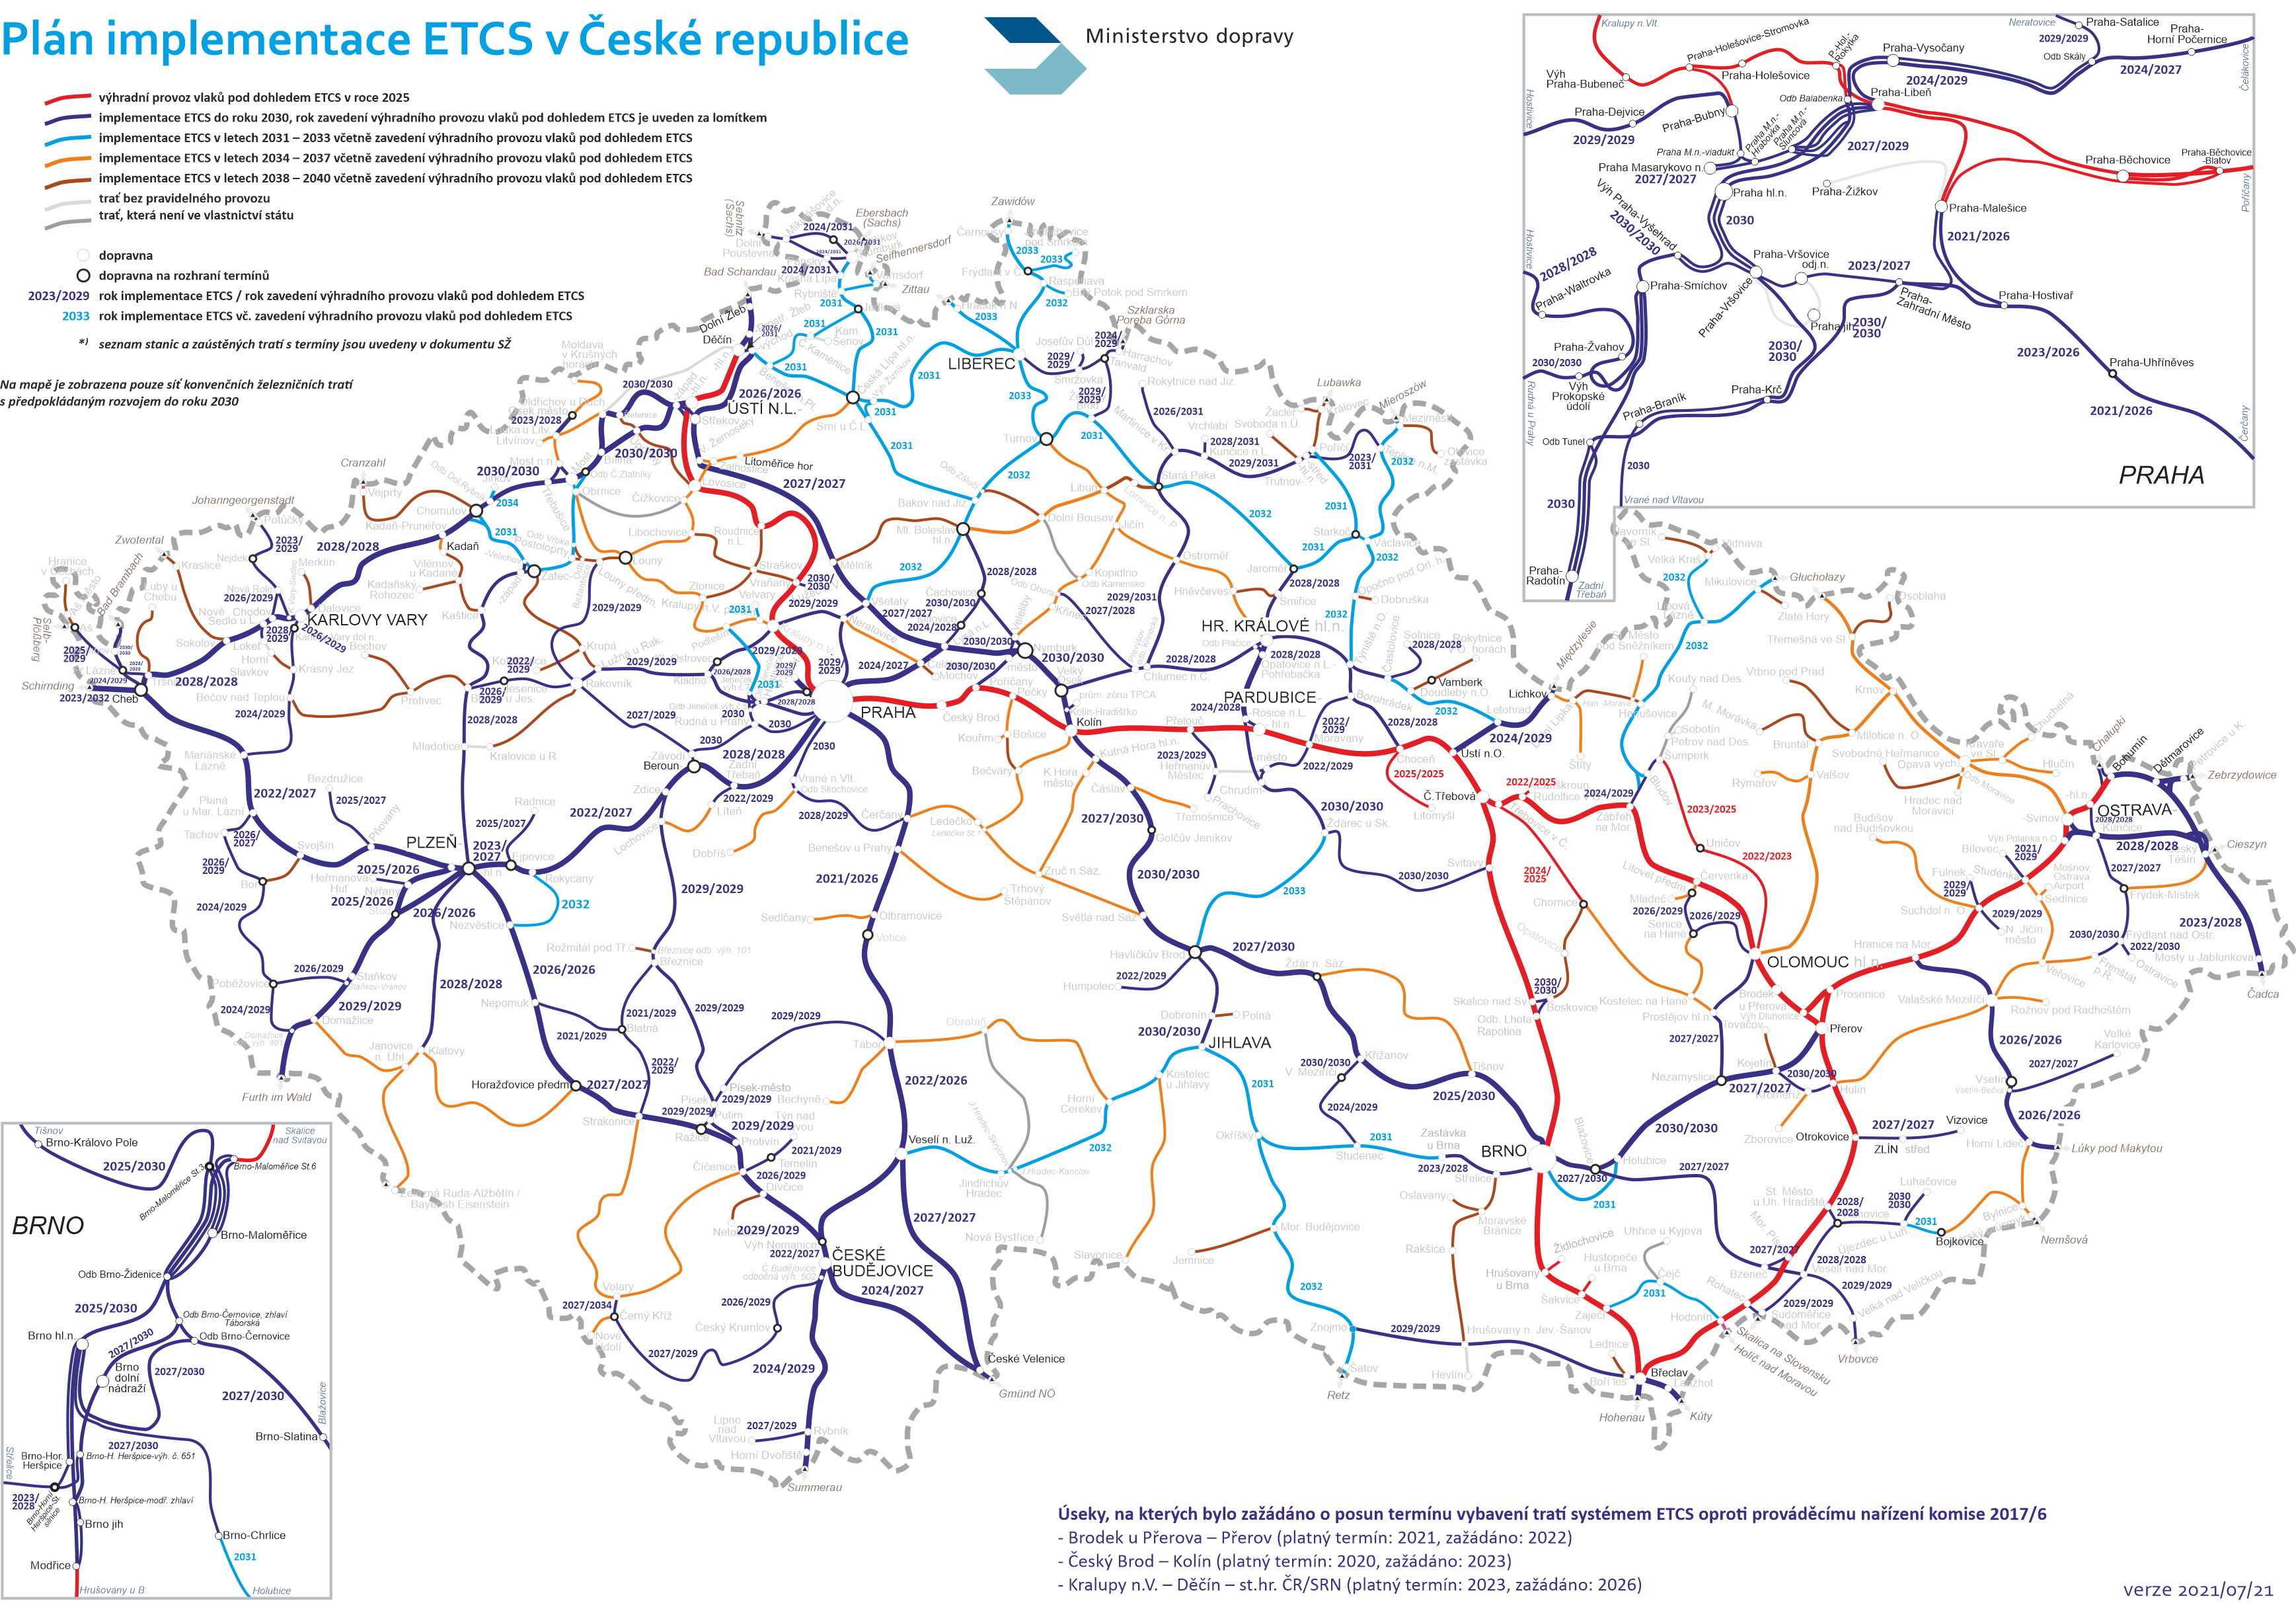 Vyhled-implementace-ETCS-A-B-C-D-VP-2021-07-21.png